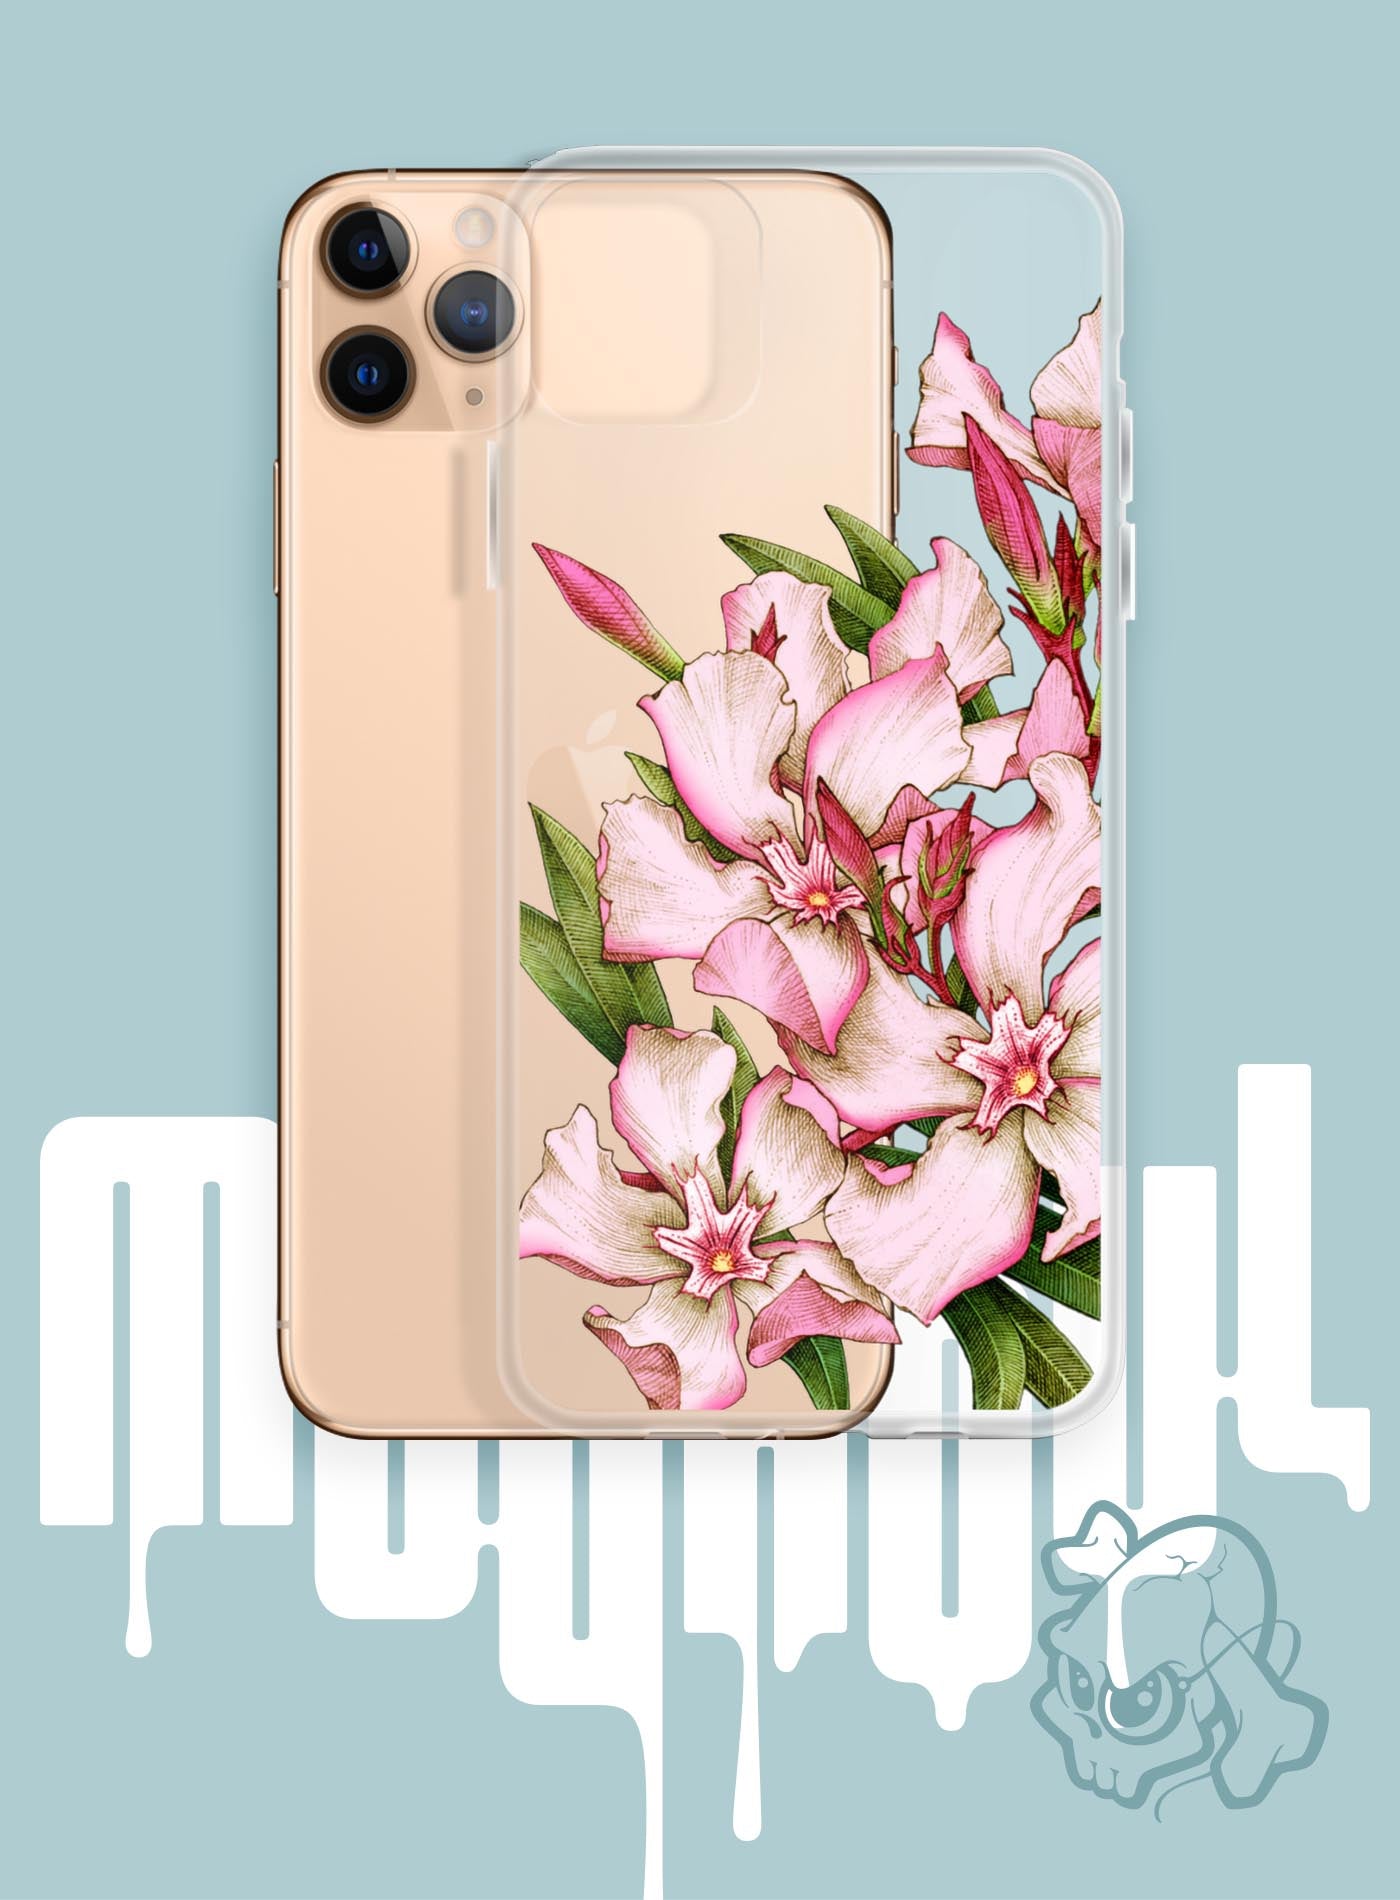 iPhone case featuring the poisonous flower Oleander. Illustrated by G.M. Meave.